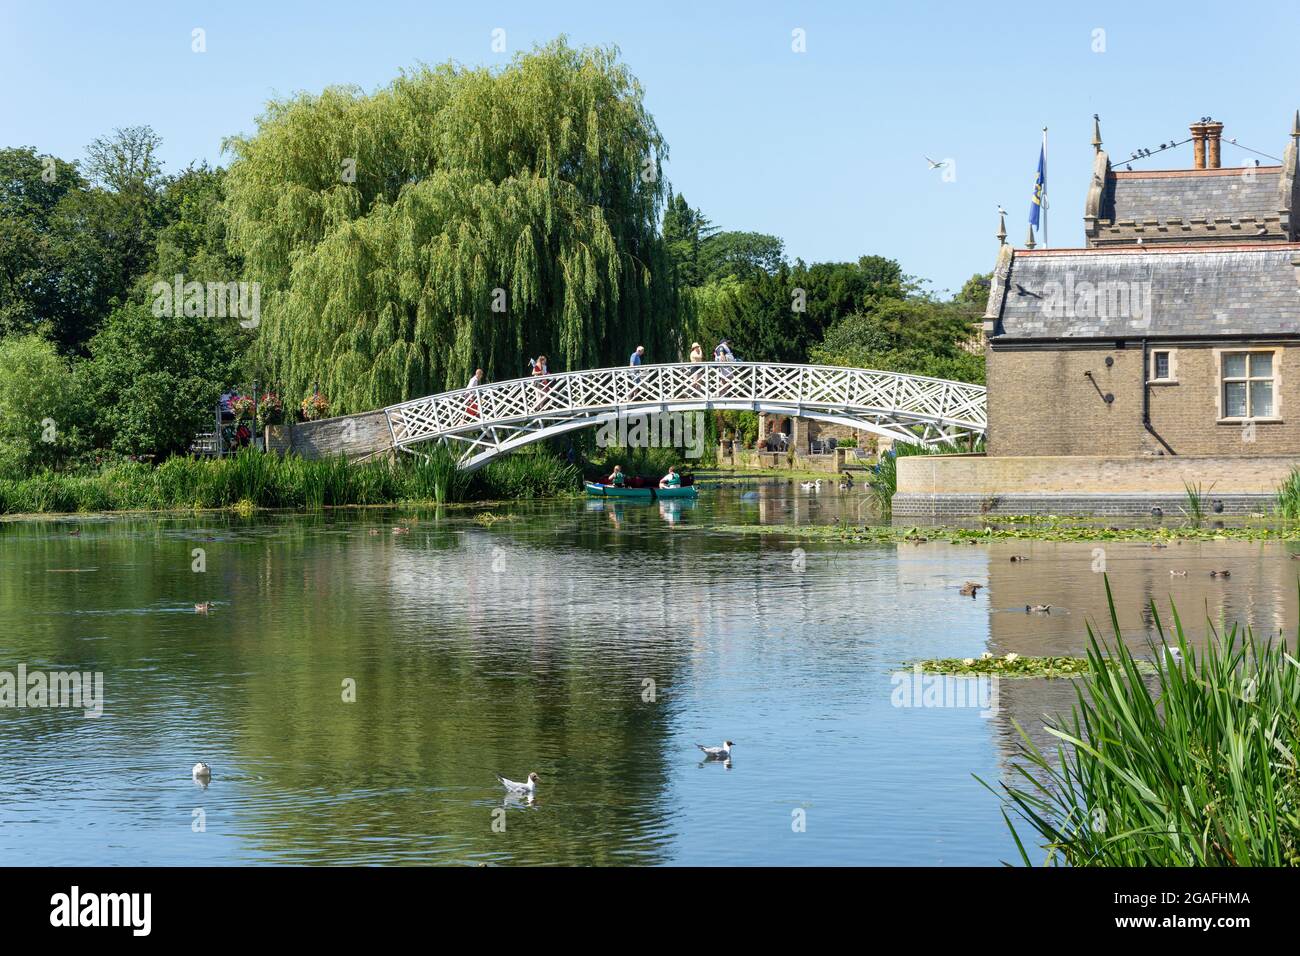 Chinese Bridge over River Great Ouse, The Causeway, Godmanchester, Cambridgeshire, England, United Kingdom Stock Photo